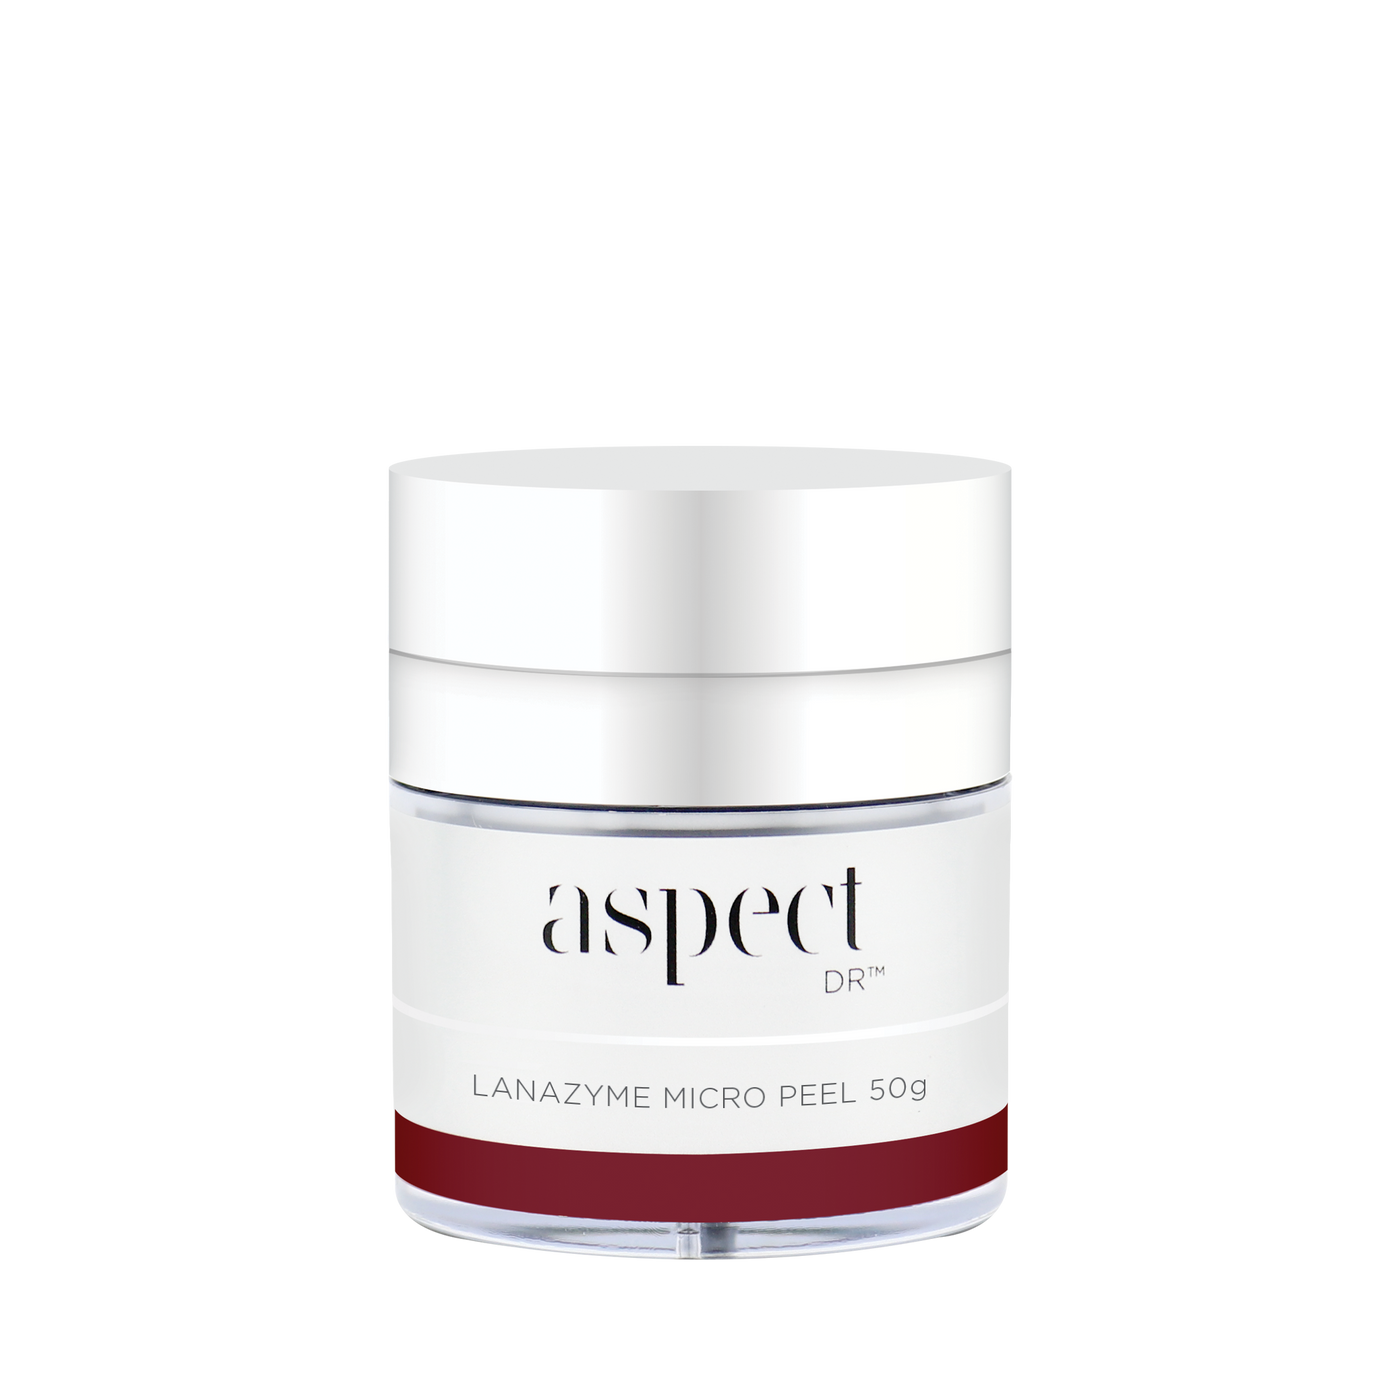 Aspect Dr Lanazyme Micro Peel Mask - Exquisite Laser Clinic 